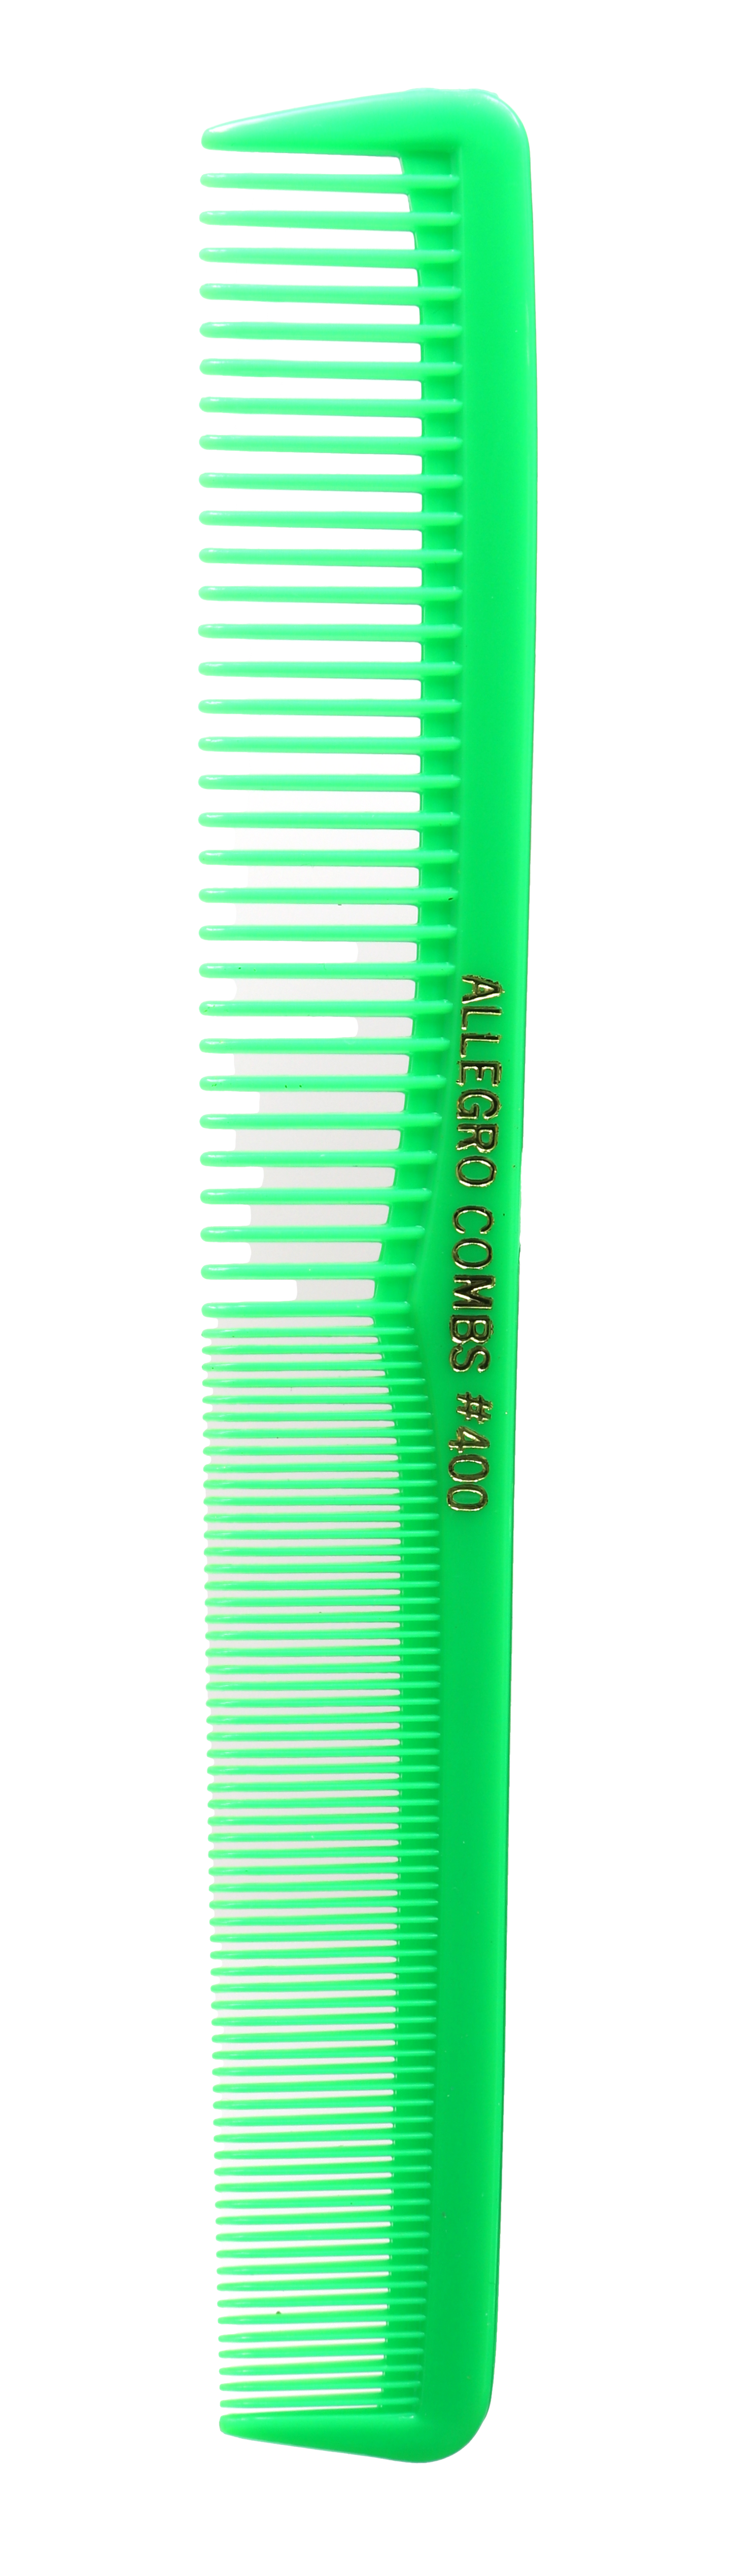 Allegro Combs 400 Barbers Combs Cutting Combs All Purpose Combs. Neon Mix 12 Pk